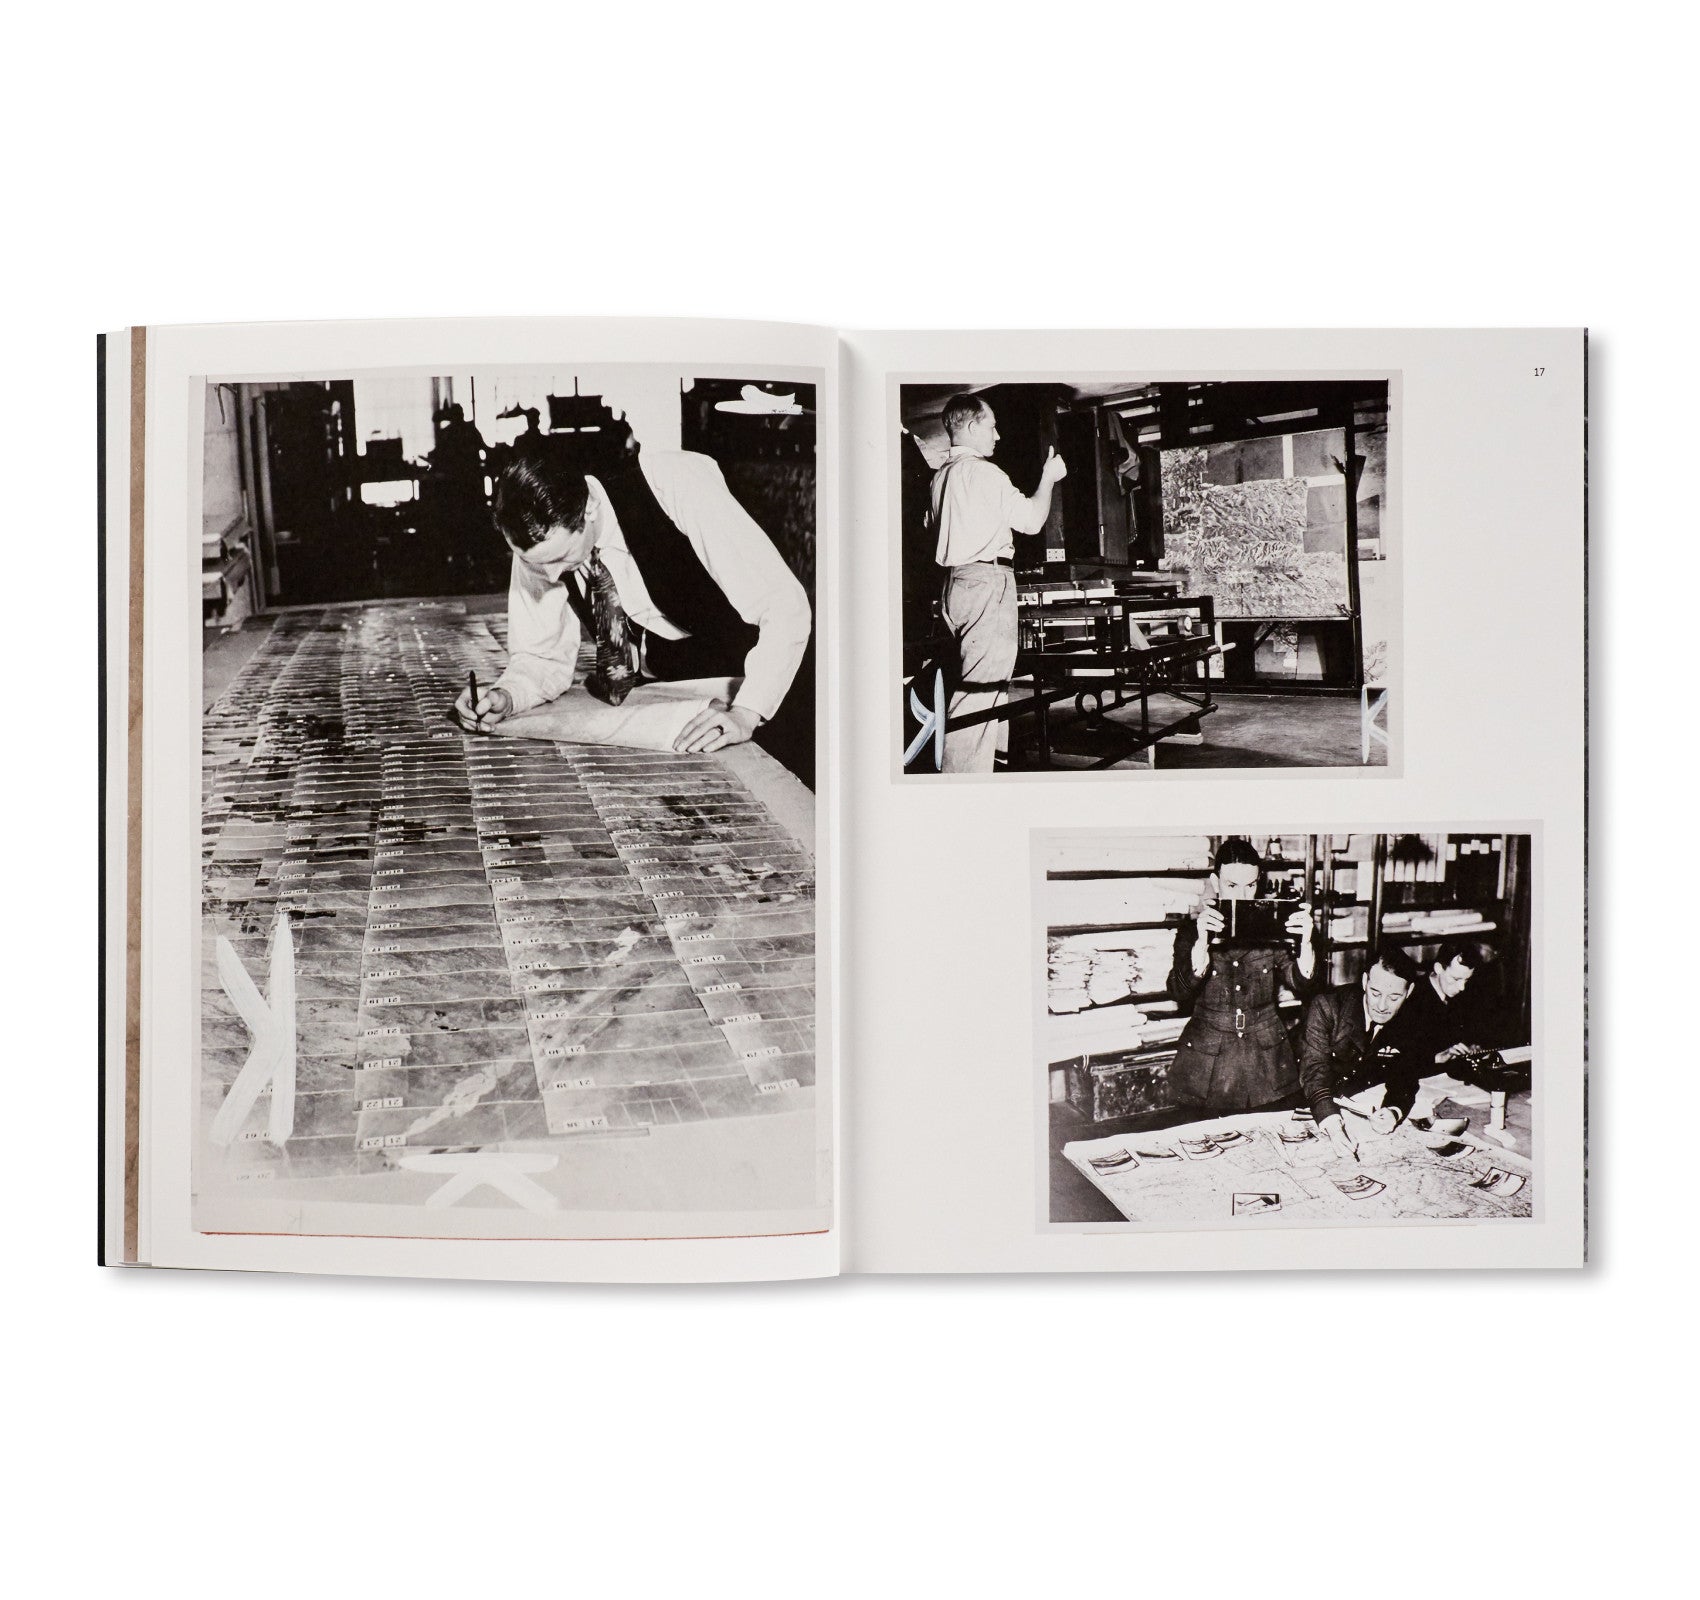 A HANDFUL OF DUST by David Campany [SECOND EDITION]